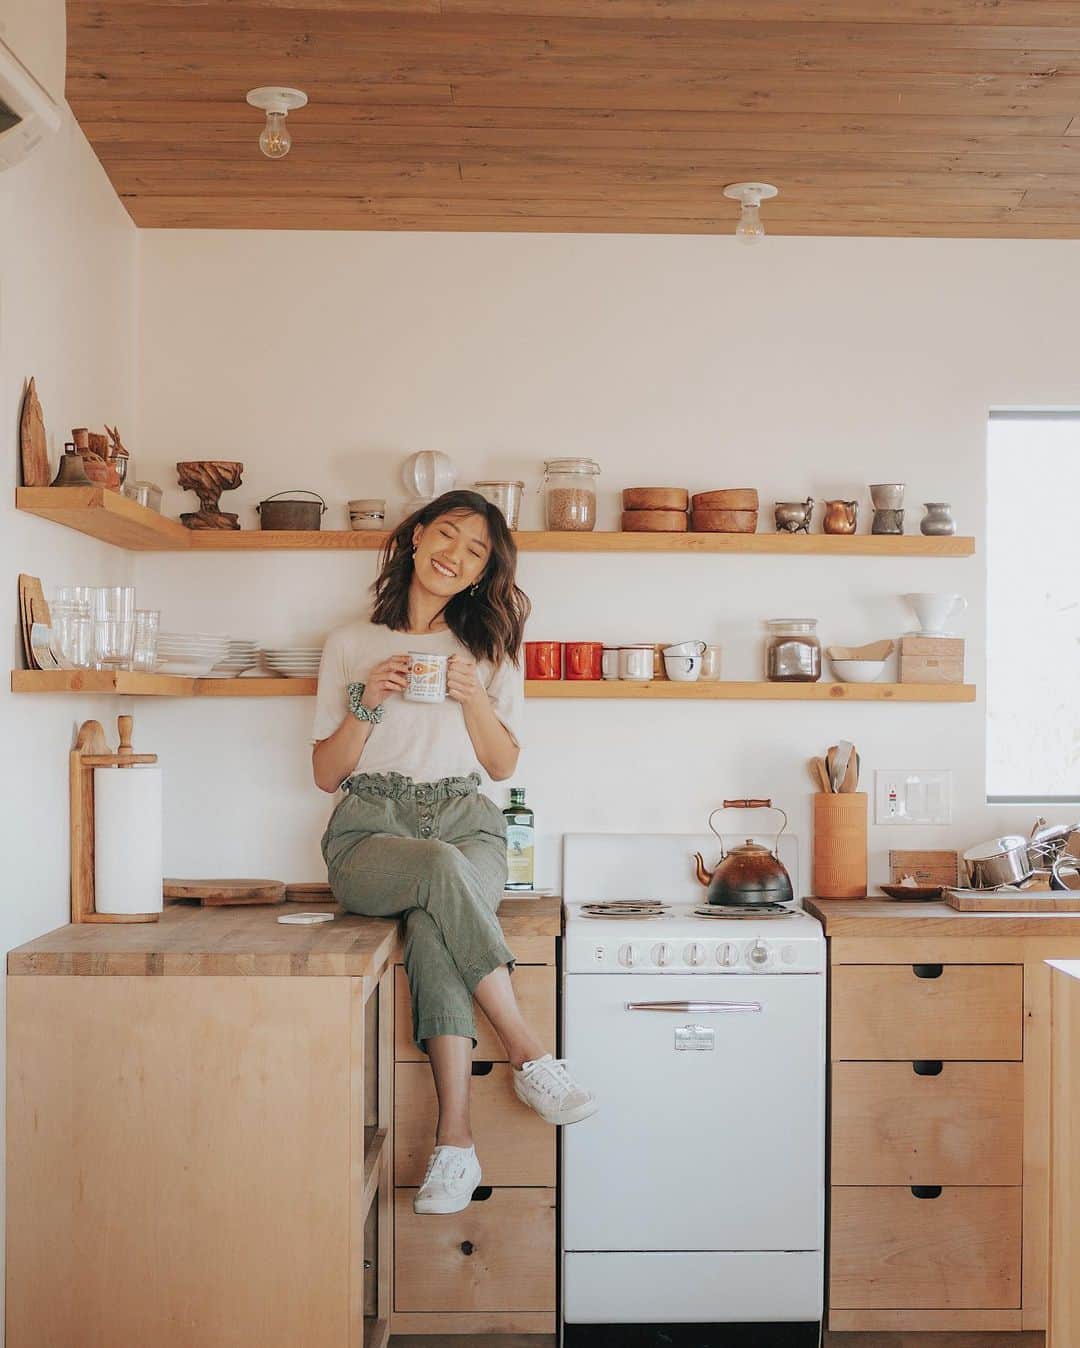 W E Y L I Eのインスタグラム：「Sitting in the vintage kitchen of my dreams! I took my first solo trip of the year to @joshuatreecabin and it was everything I dreamed of! I journaled, cooked the most delicious spaghetti 🍝, went for a walk in the desert, and just sat in silence & listened to the wind. I feel inspired to create again and I’m hopeful for what’s to come in 2021.   Also, this was one of my favorite Airbnb experiences! The host allows a 3-day break between guests and it’s tucked away in a secluded property. I was surrounded by panoramic views of Joshua Tree and the mountains. I vlogged my trip too and can’t wait to show you!」